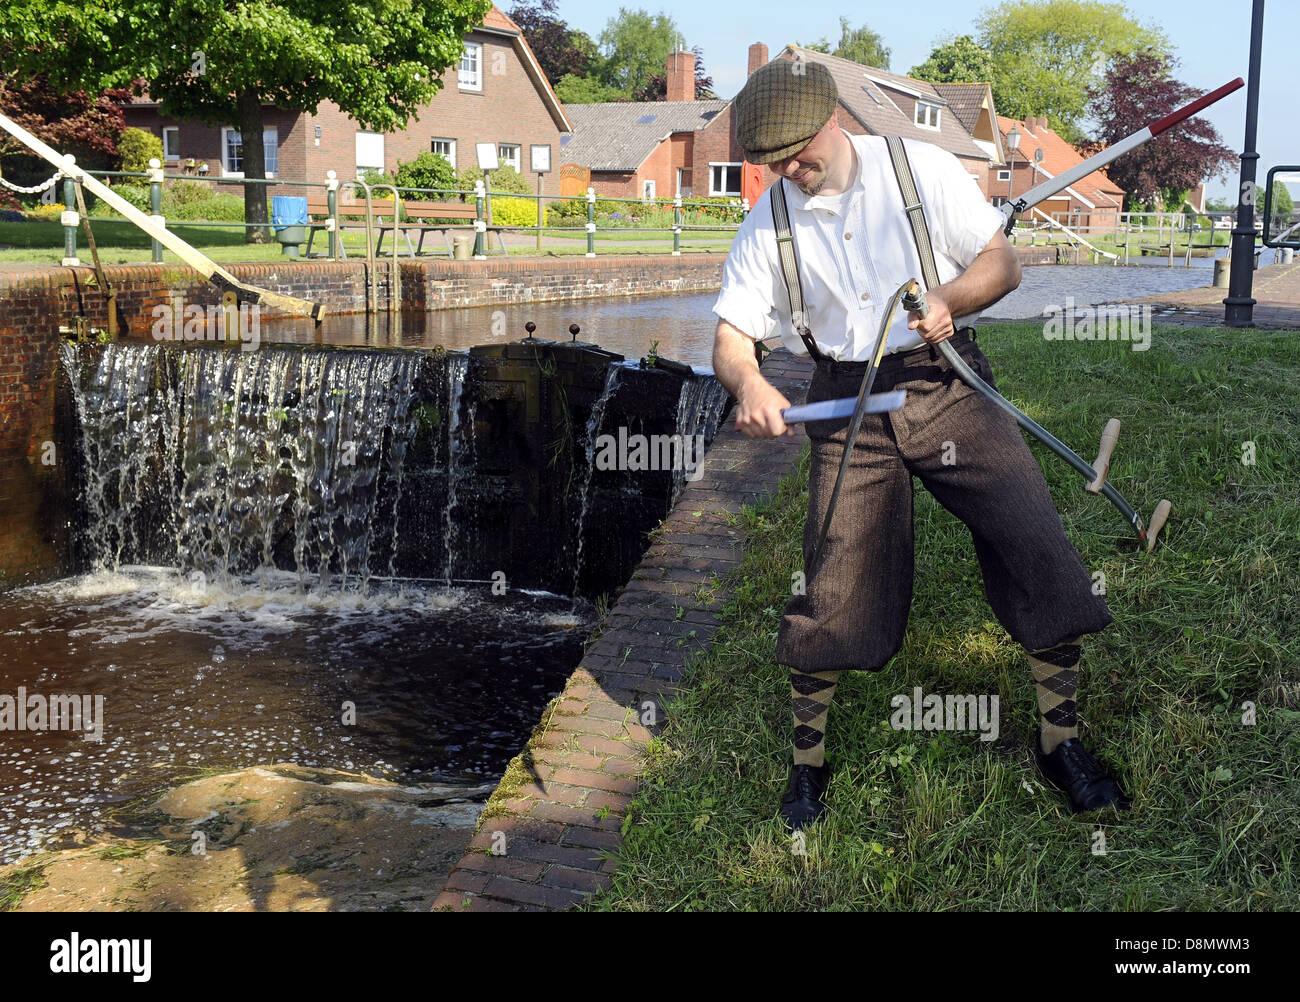 Thomas Balzen from the Fehn Museum dressed in historic clothing mows the grass in the Fehn Canal outside of the museum in Westgrossfehn, Germany, 31 May 2013. The height difference between a 17th century built channel and the natural waterway can be seen in the background. This drop was used to drive a sawmill in the past. Photo: INGO WAGNER Stock Photo